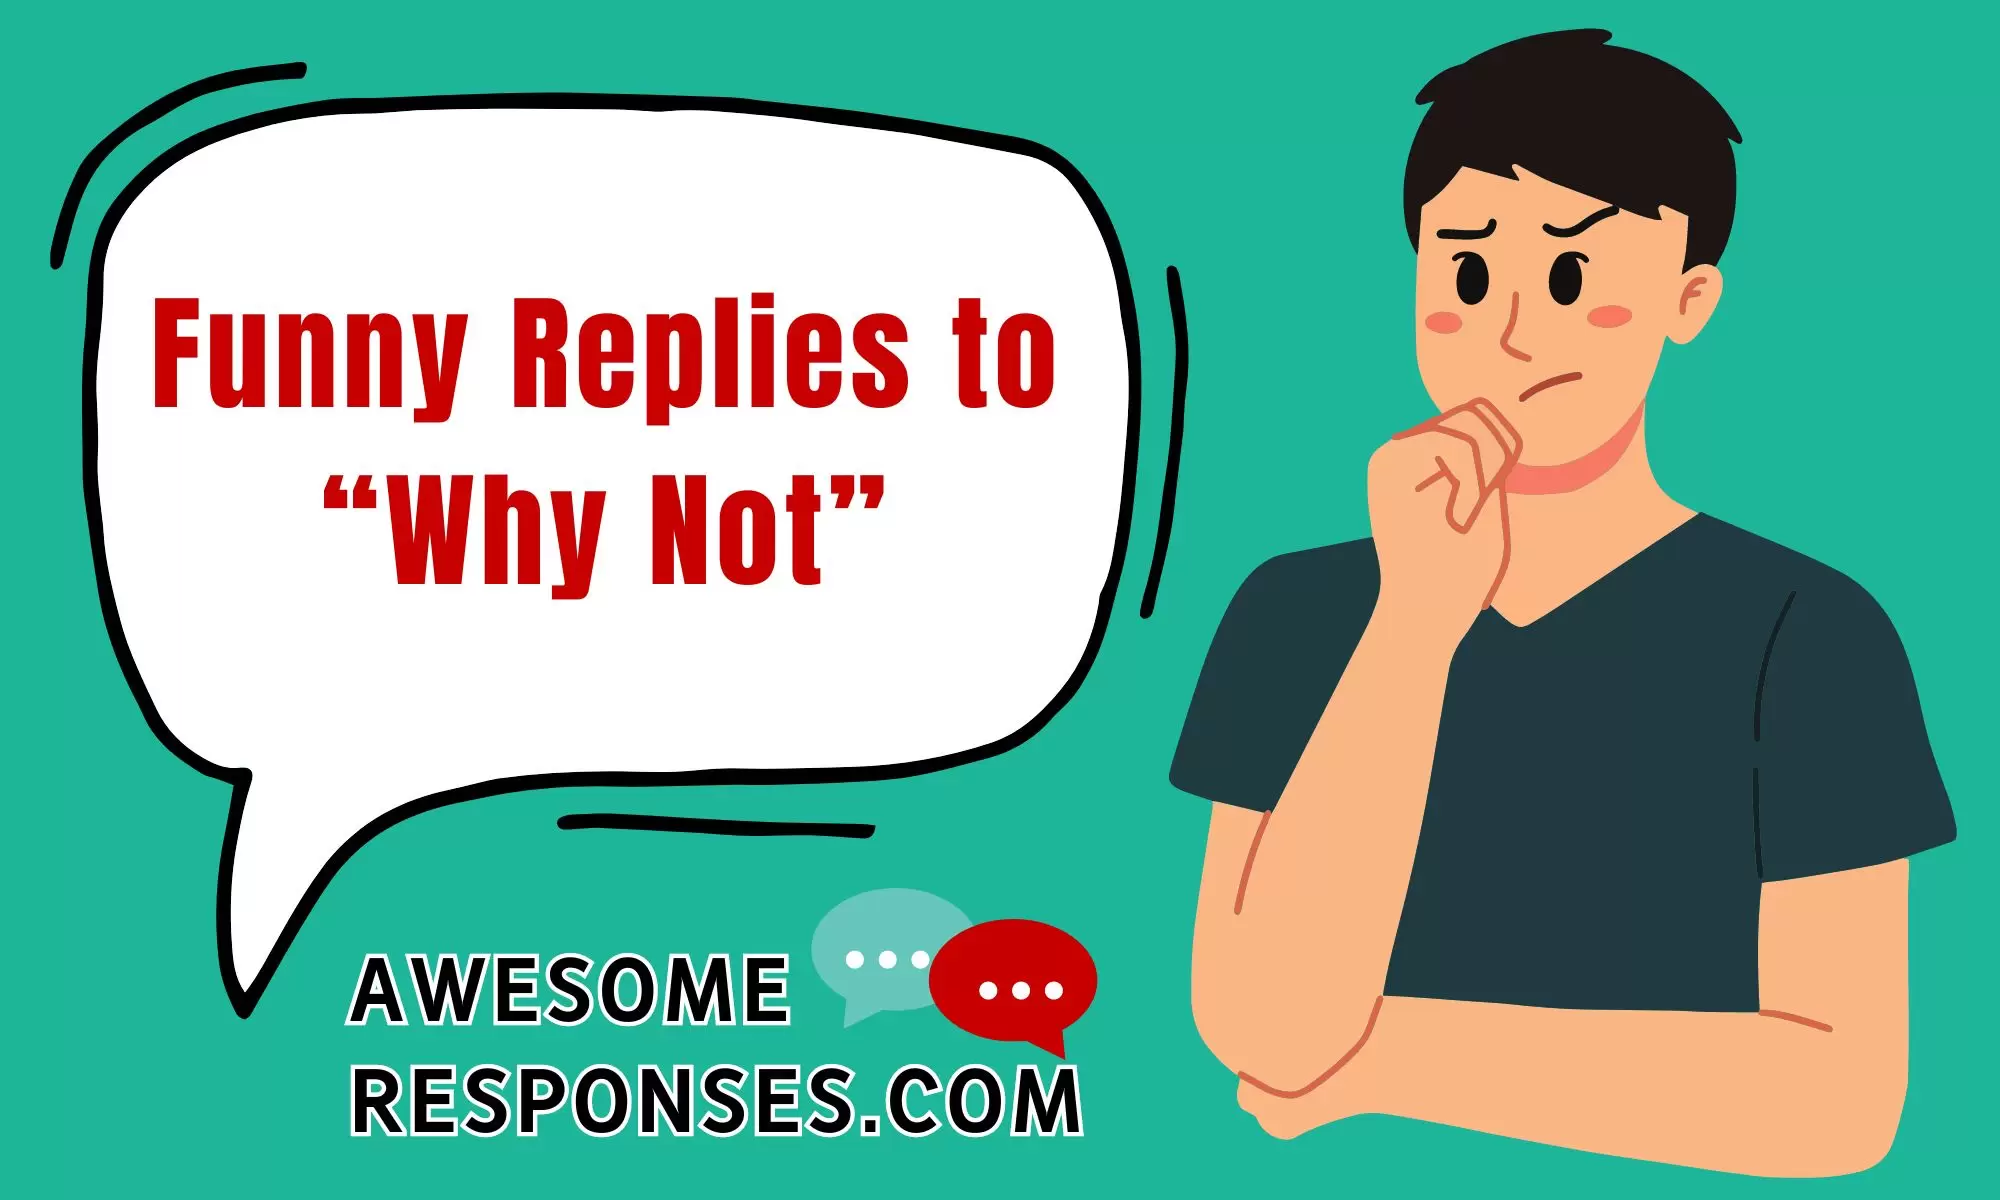 Funny Replies to “Why Not”